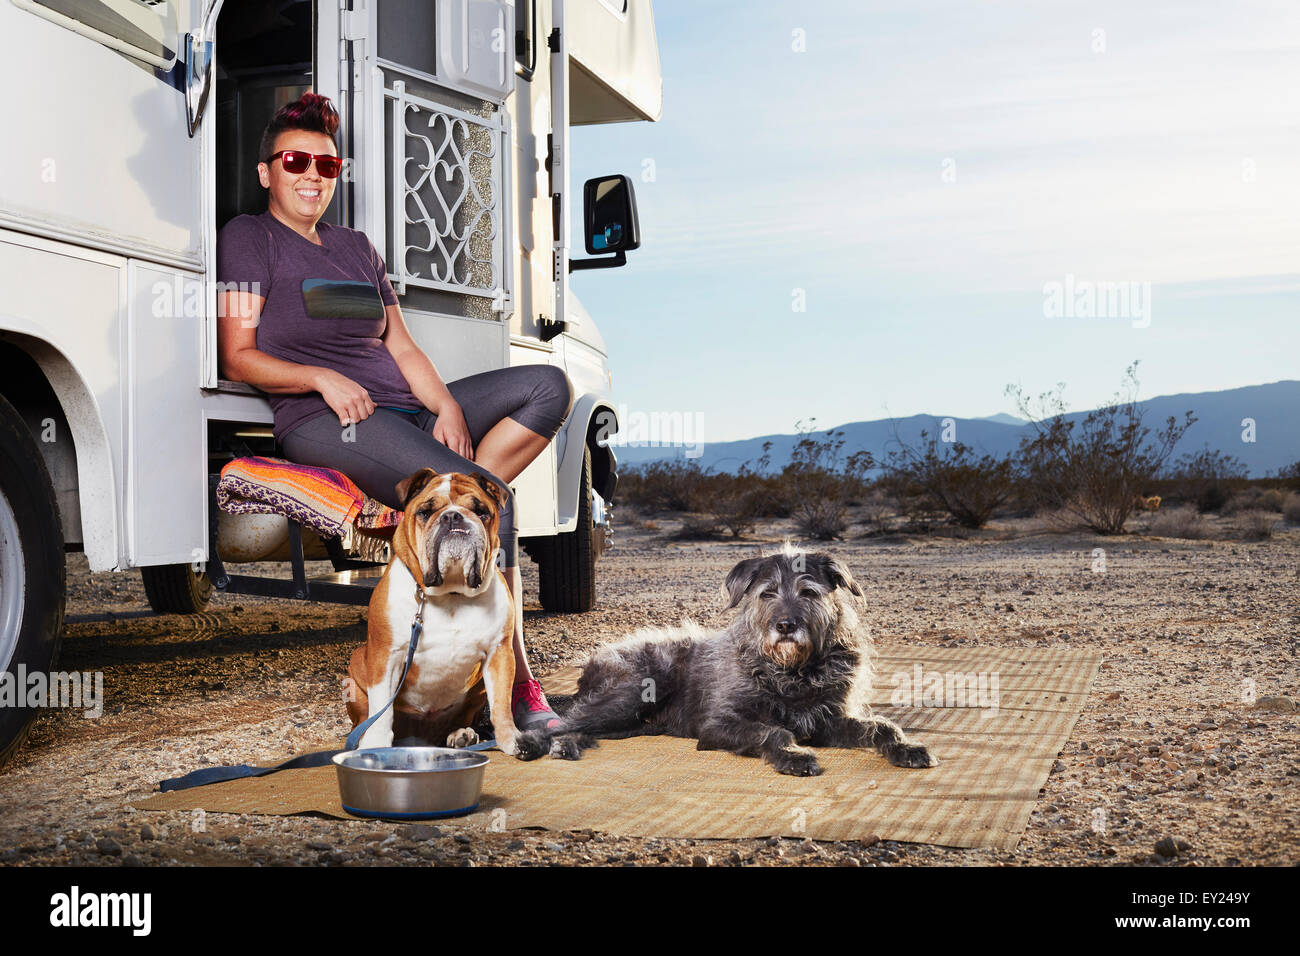 Portrait of mid adult woman and two dogs sitting on camper van step, Borrego Springs, California, USA Stock Photo